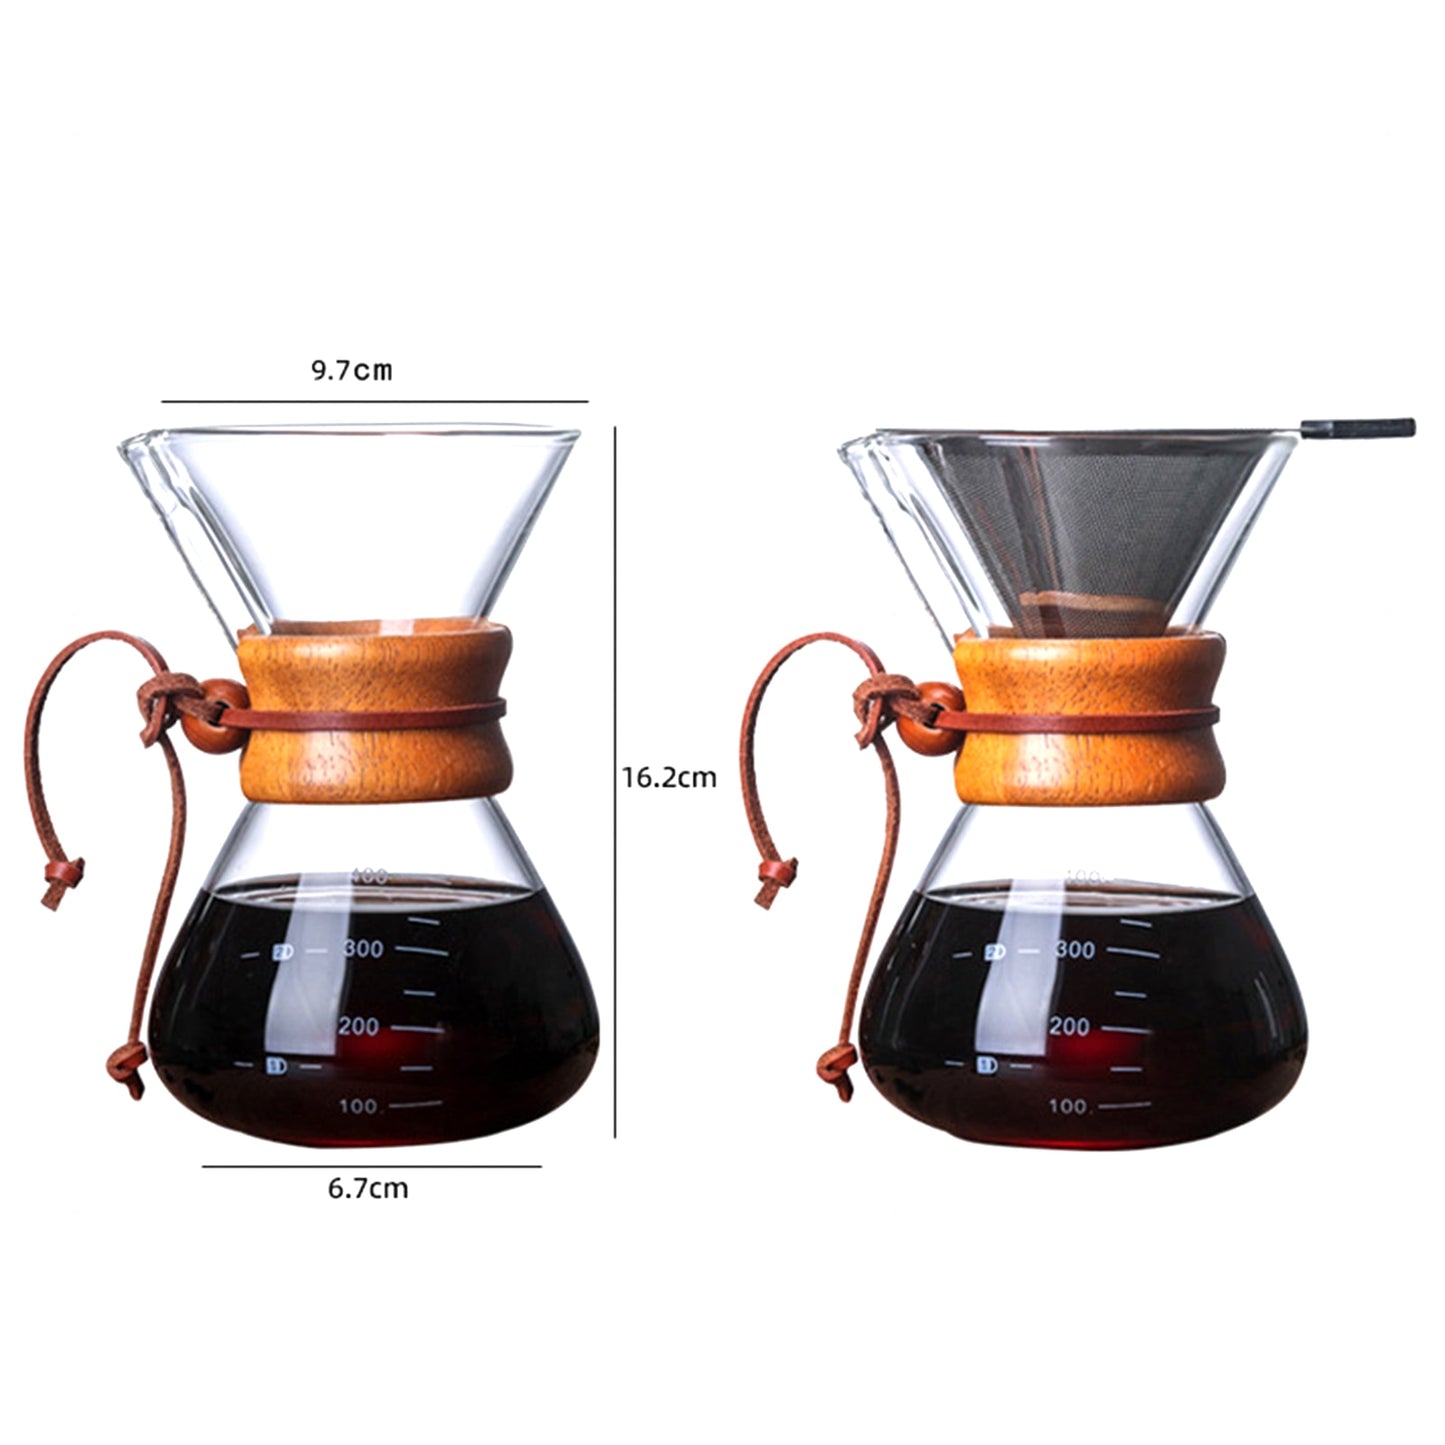 Elevate Your Coffee Experience with the Glass Kettle & Steel Filter Brewer